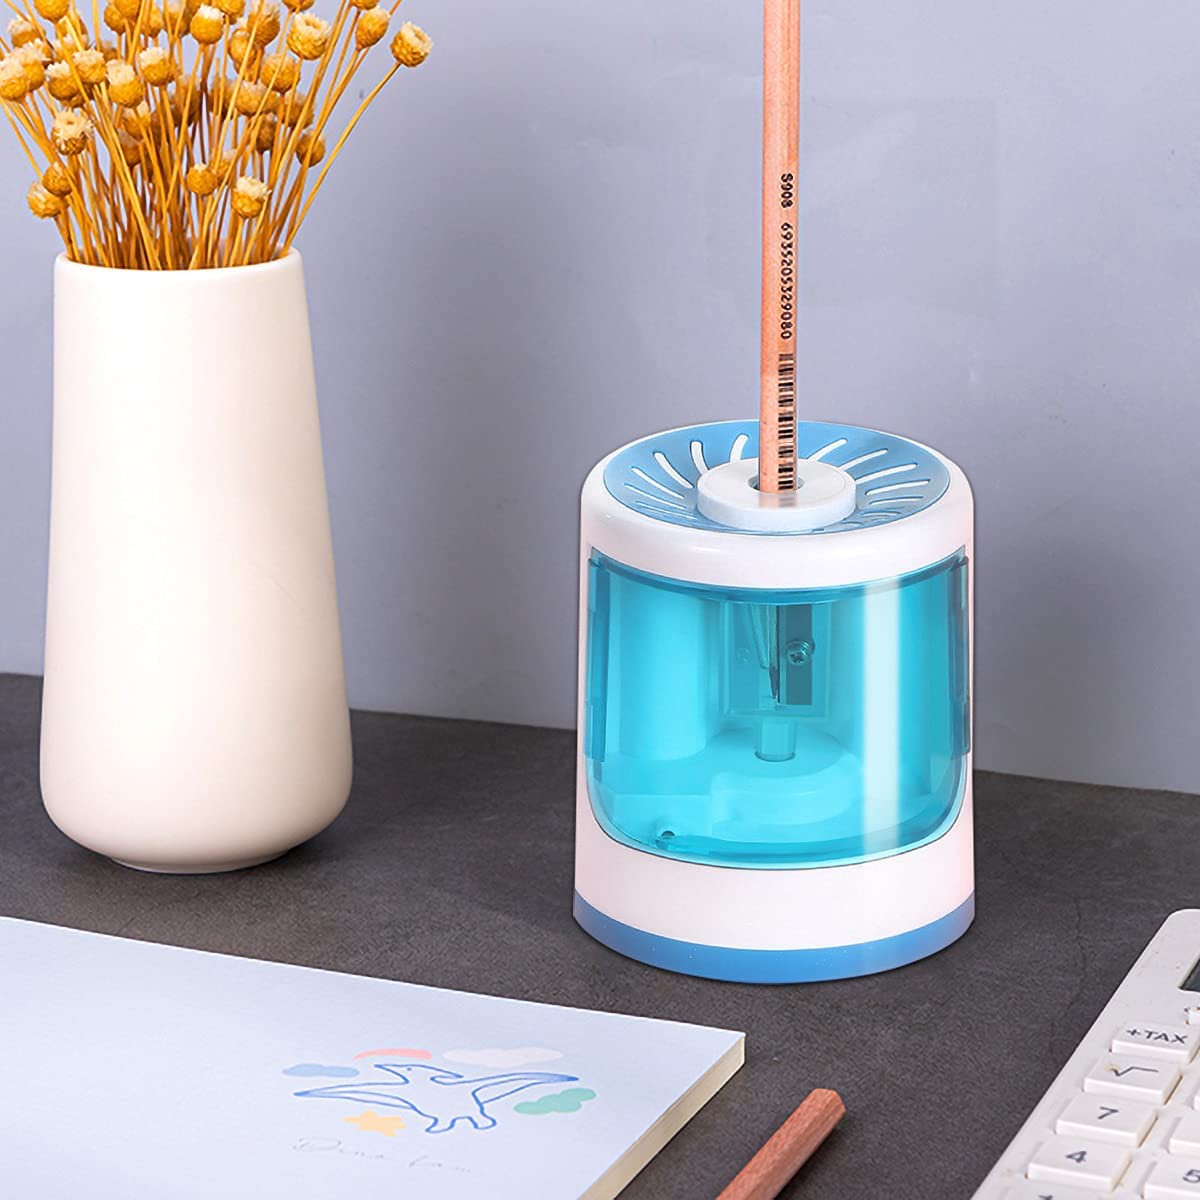 Pencil Sharpeners Battery Operated, Electric Pencil Sharpener Heavy Duty School Supplies for Kids, Suitable for Number #2 Pencil Colored Pencils & Charcoal Pencil (6-8mm), Automatic Pencil Sharpener